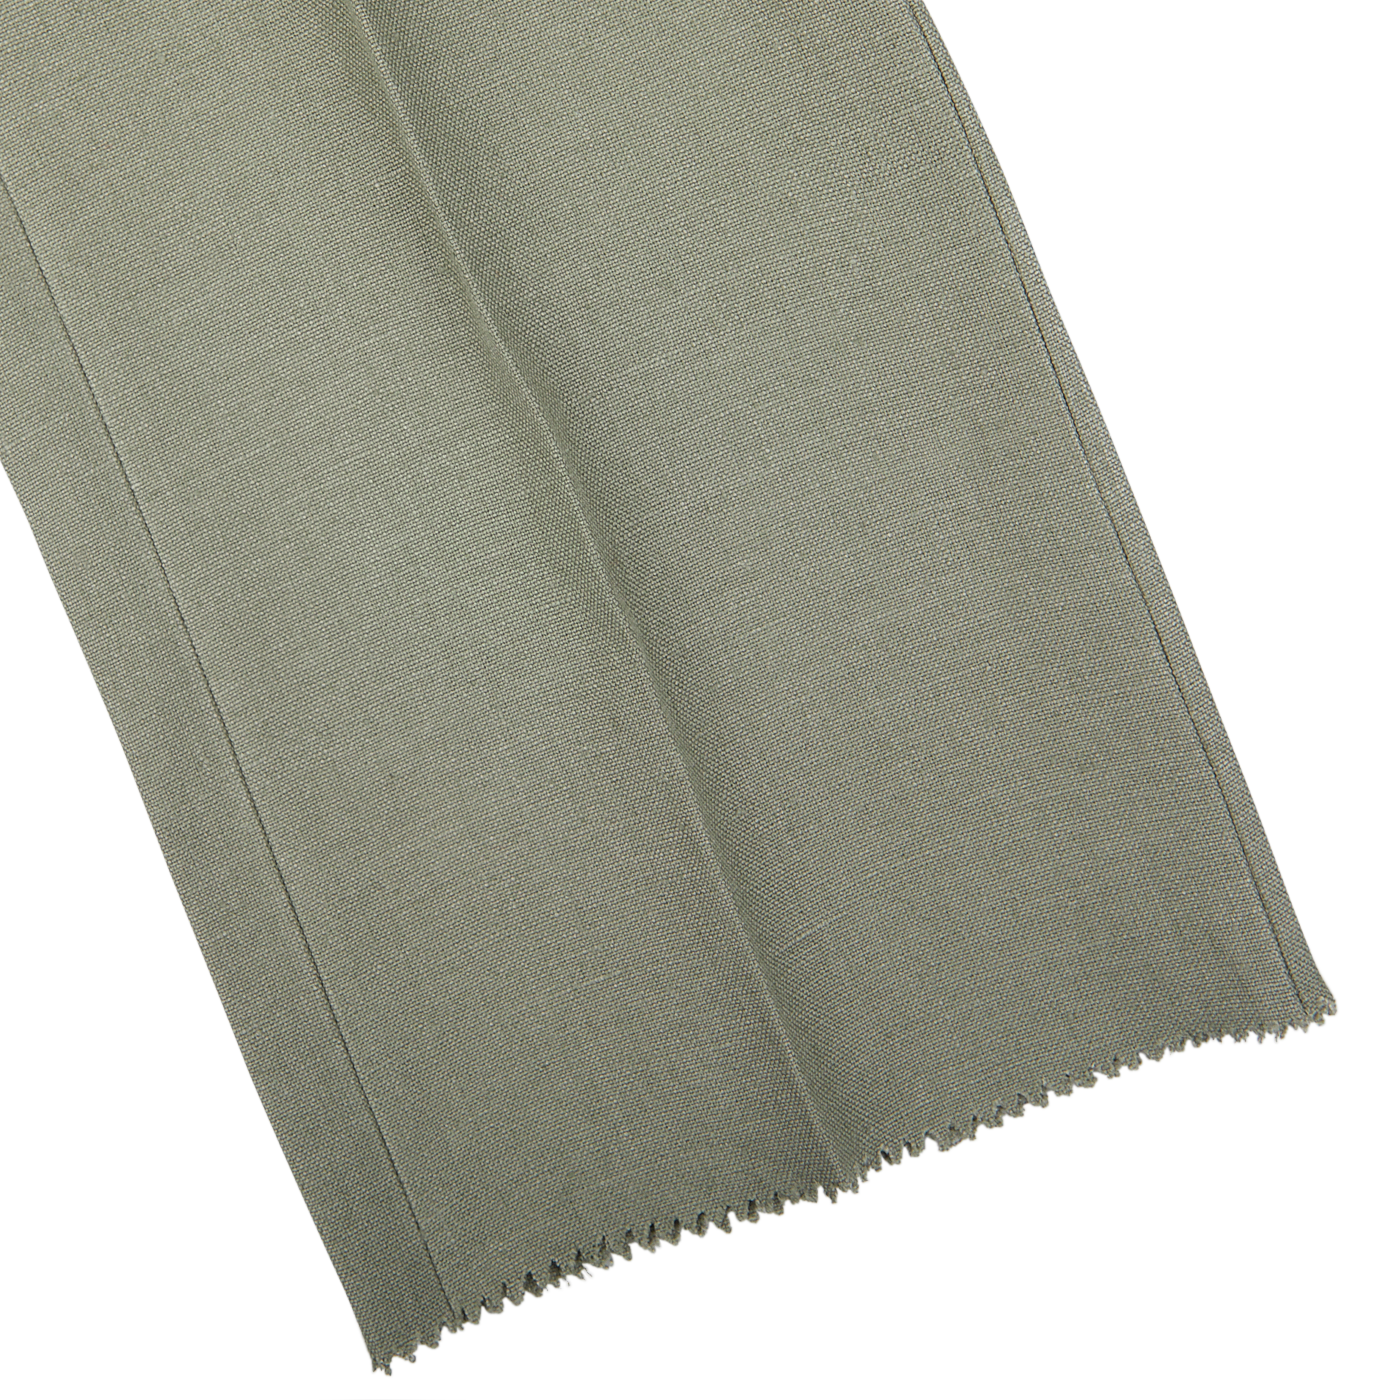 A piece of light grey, textured fabric on a white surface with a zigzag cut along the bottom edge, reminiscent of the exquisite craftsmanship found in Studio 73's Sage Green Canapa Hemp DB Suit.